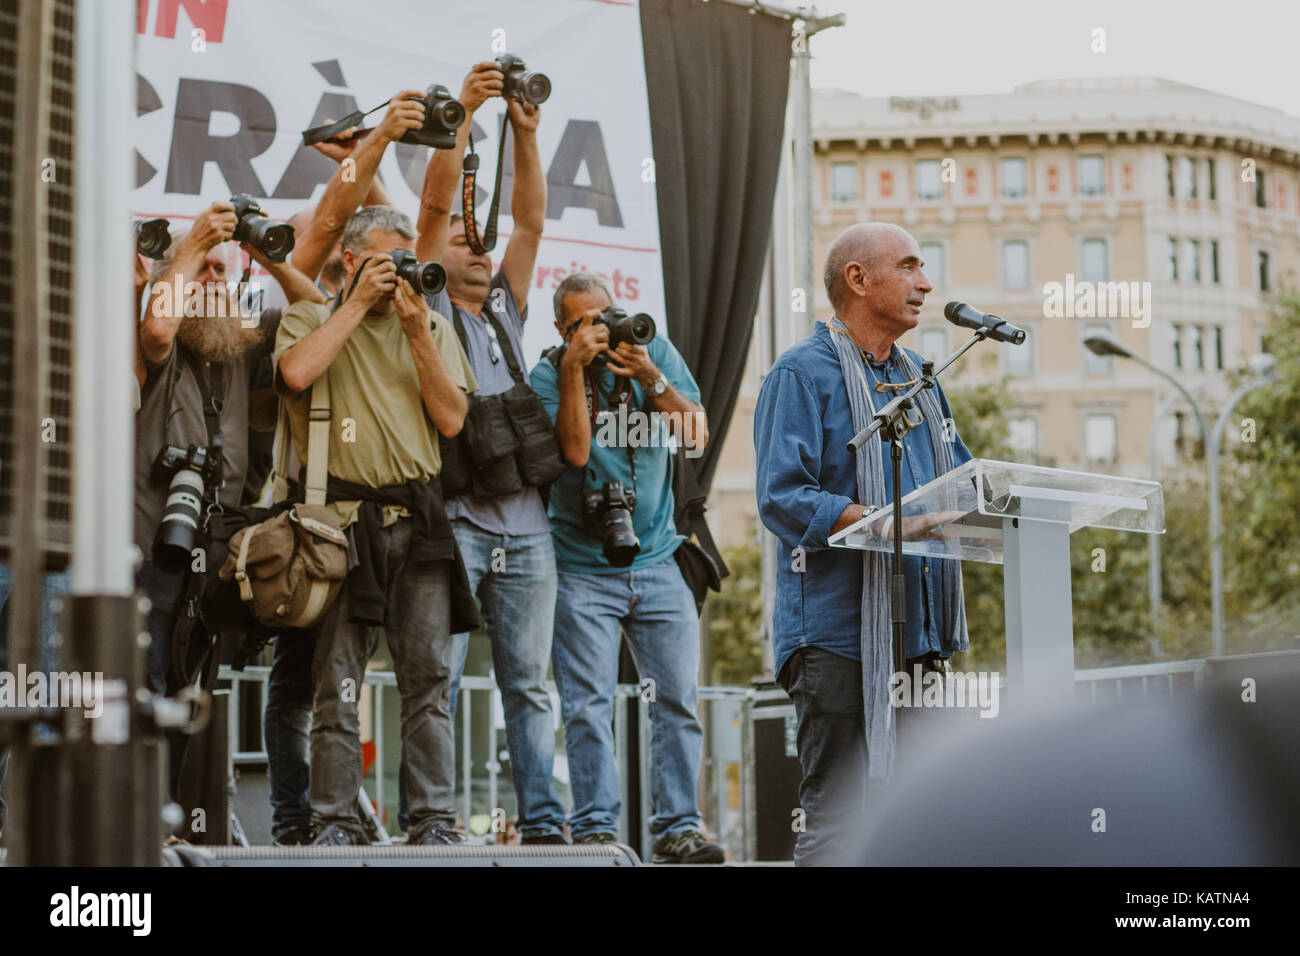 Barcelona, September 27. Central act with different politicians on the referendum of October 1st. Photographs by the singer-songwriter Lluís Llach.  Barcelona, September 27. Credits: Irena Mora Soler. Stock Photo